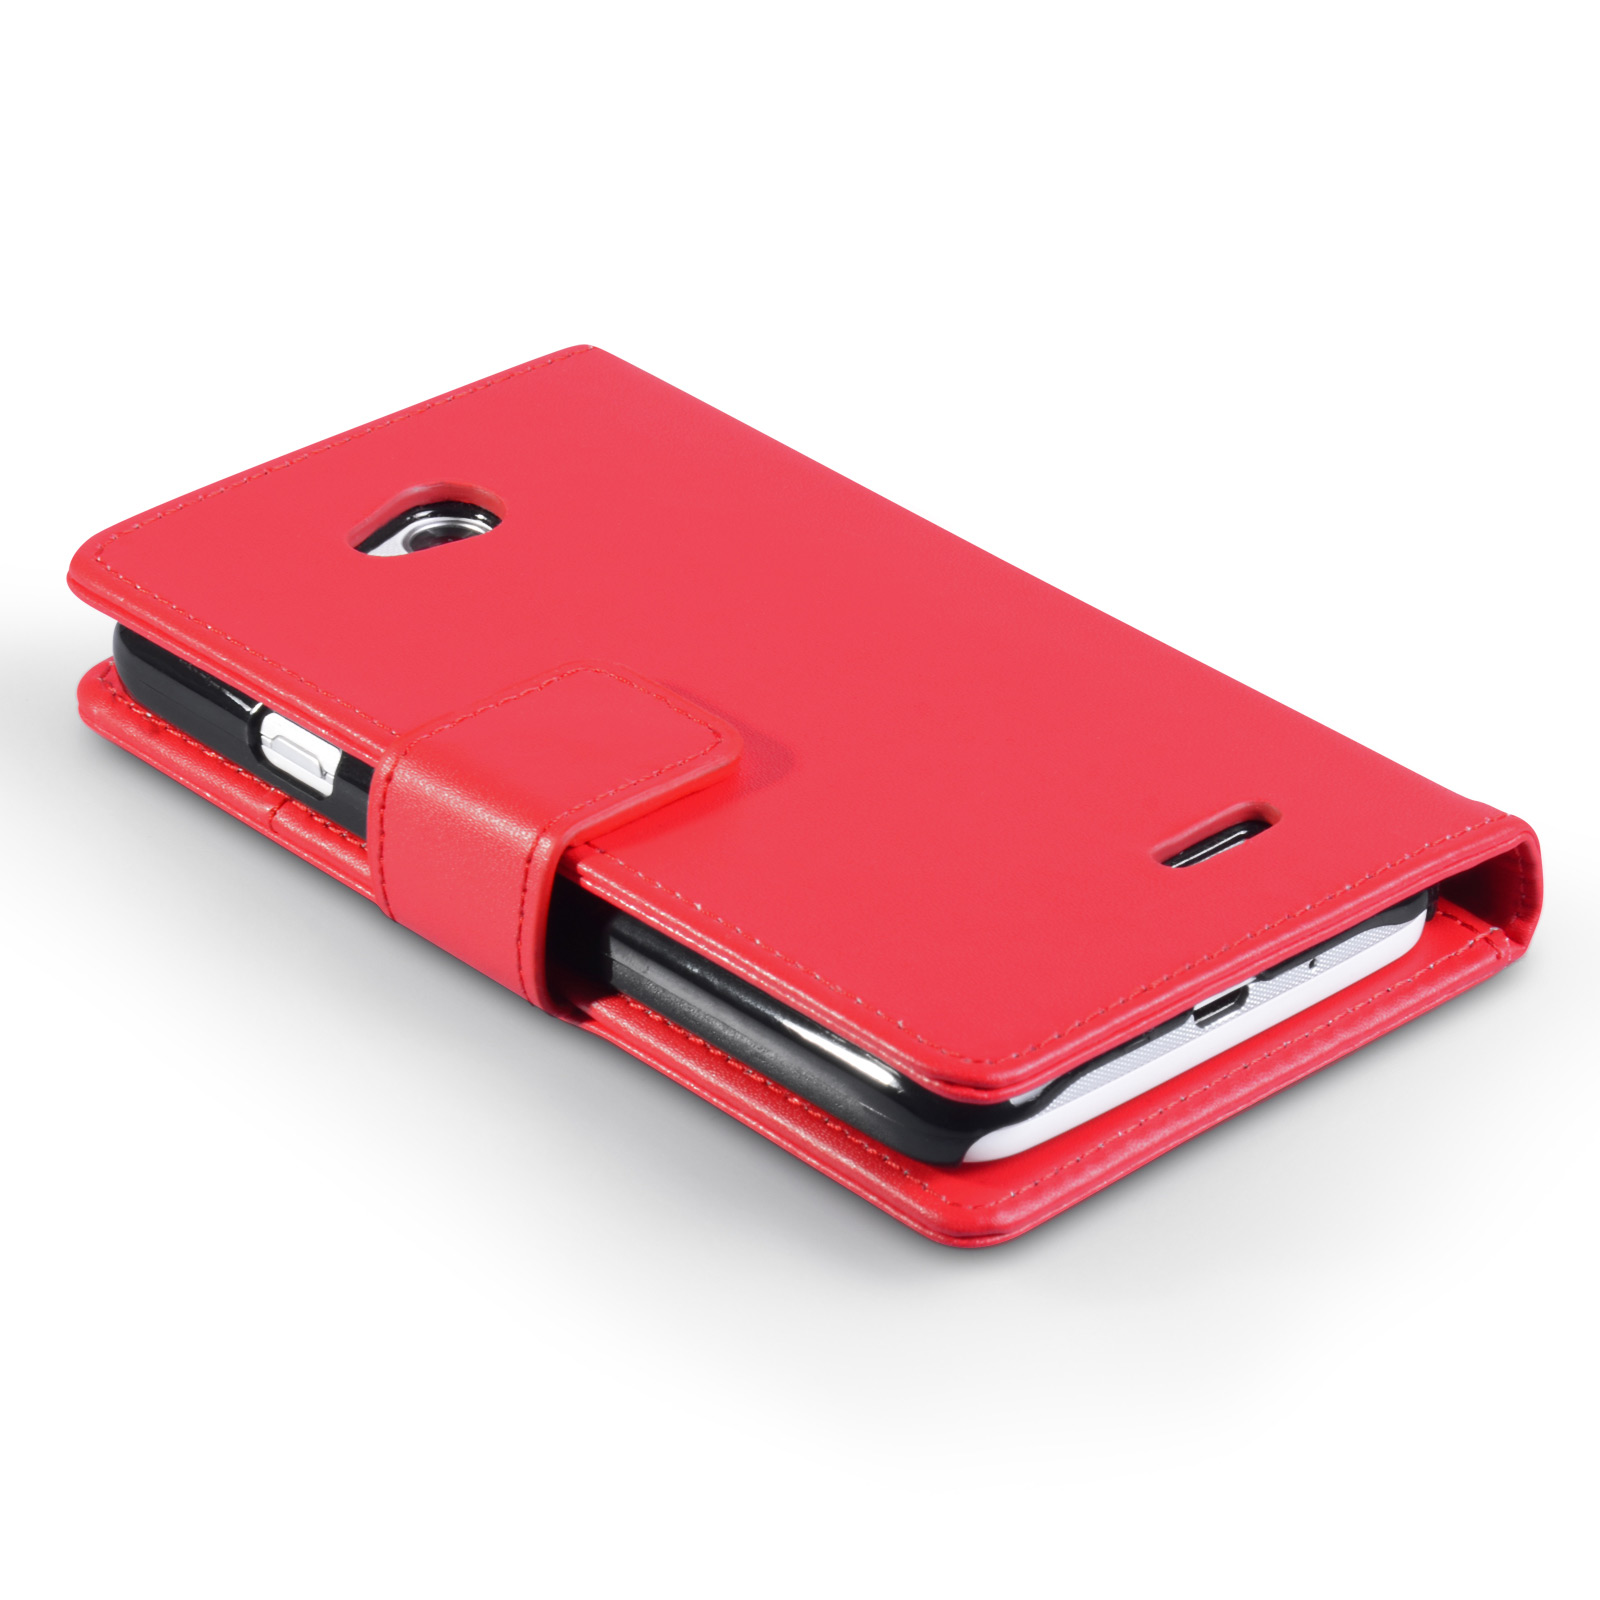 YouSave Accessories LG L90 Leather-Effect Wallet Case - Red